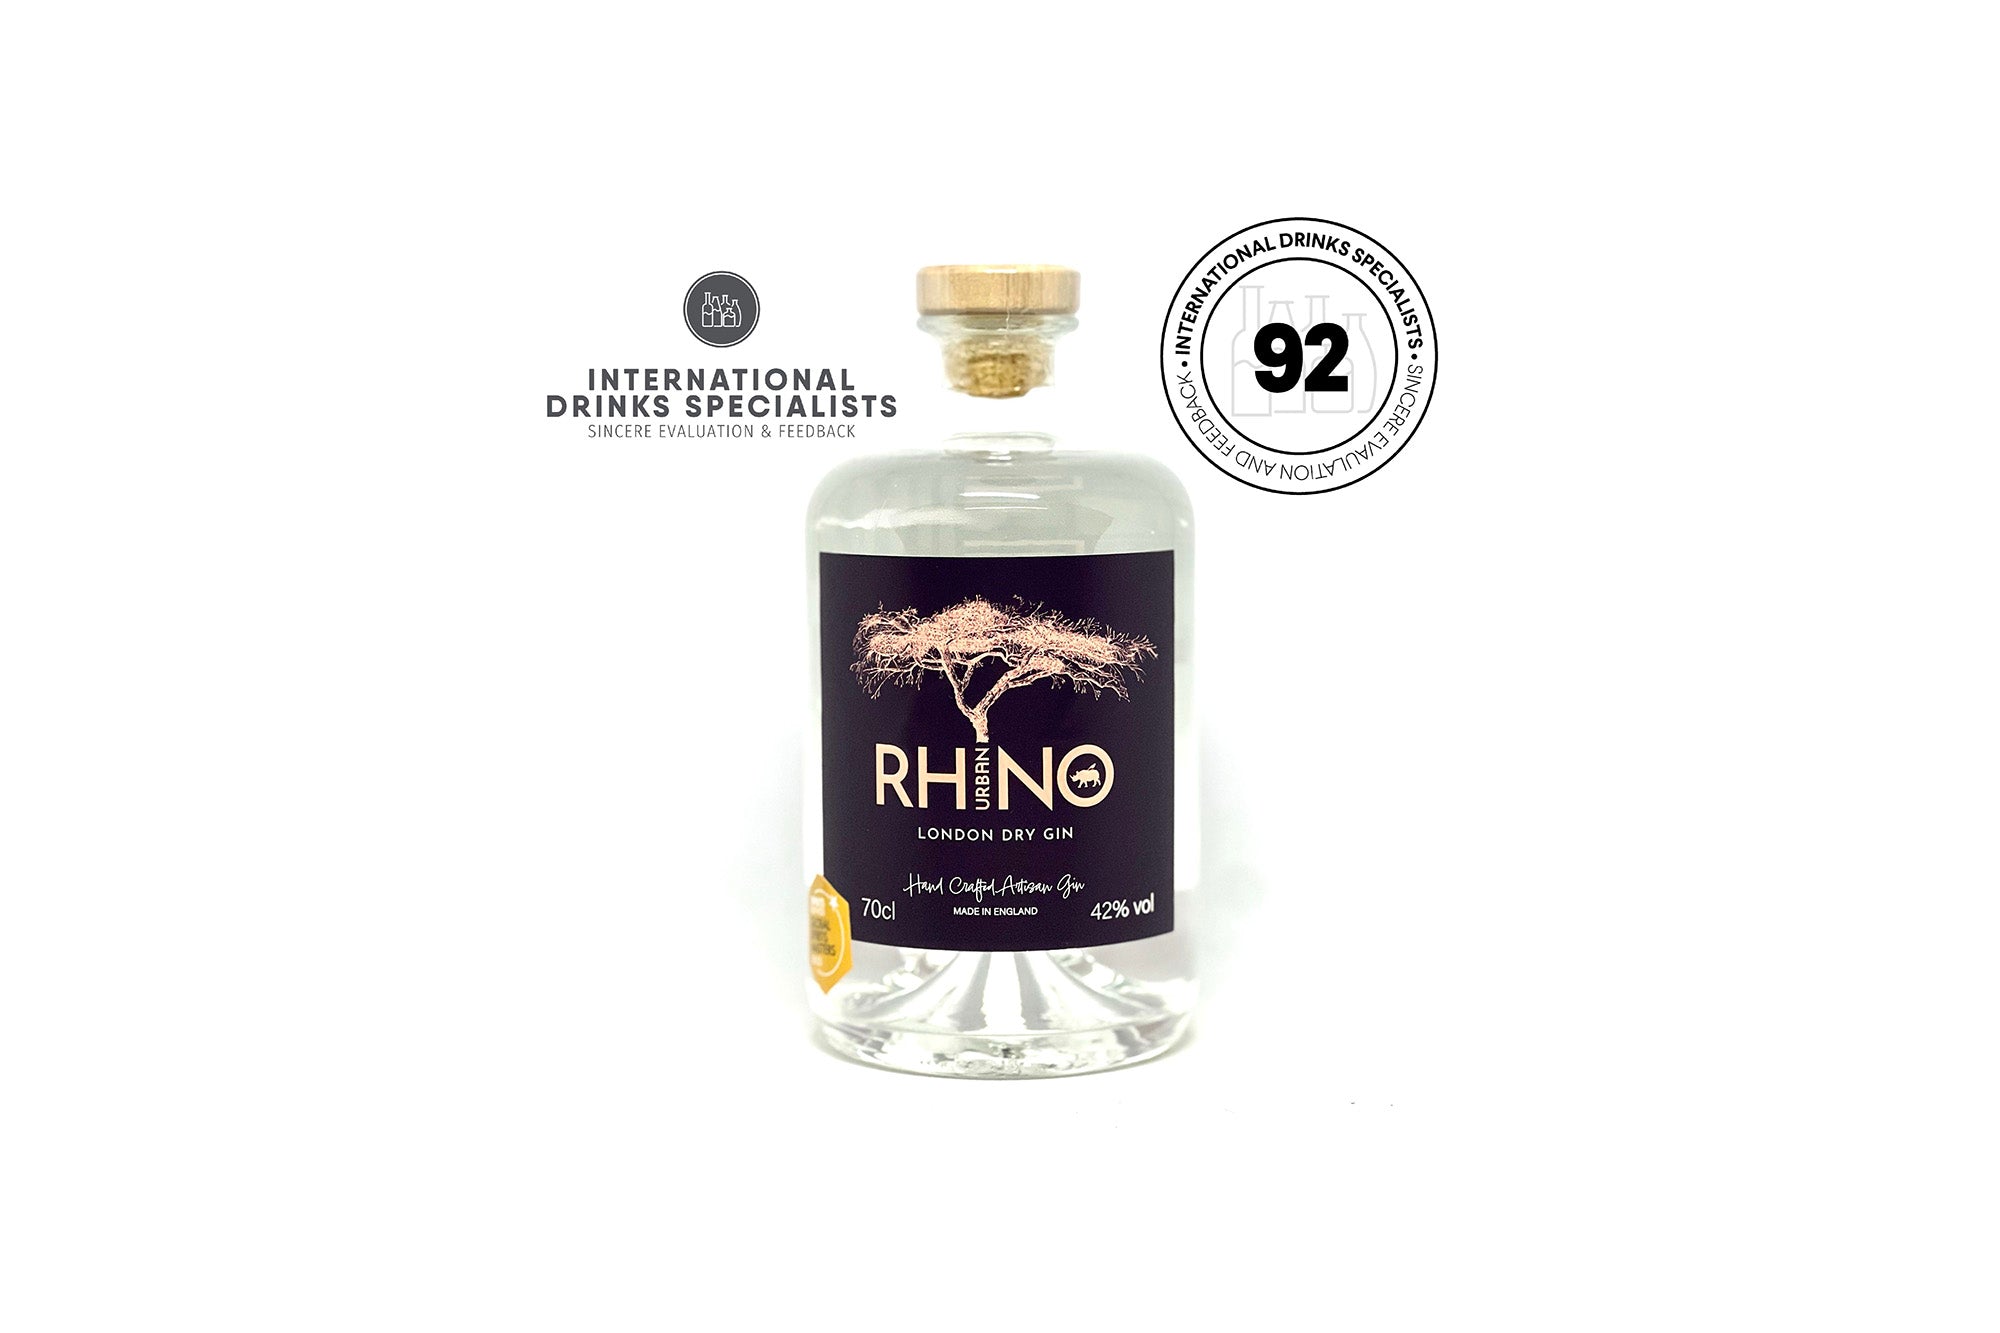 URBAN Rhino Premium London Dry gin has been awarded an amazing 92 out of 100 by the experts at International Drinks Specialists.